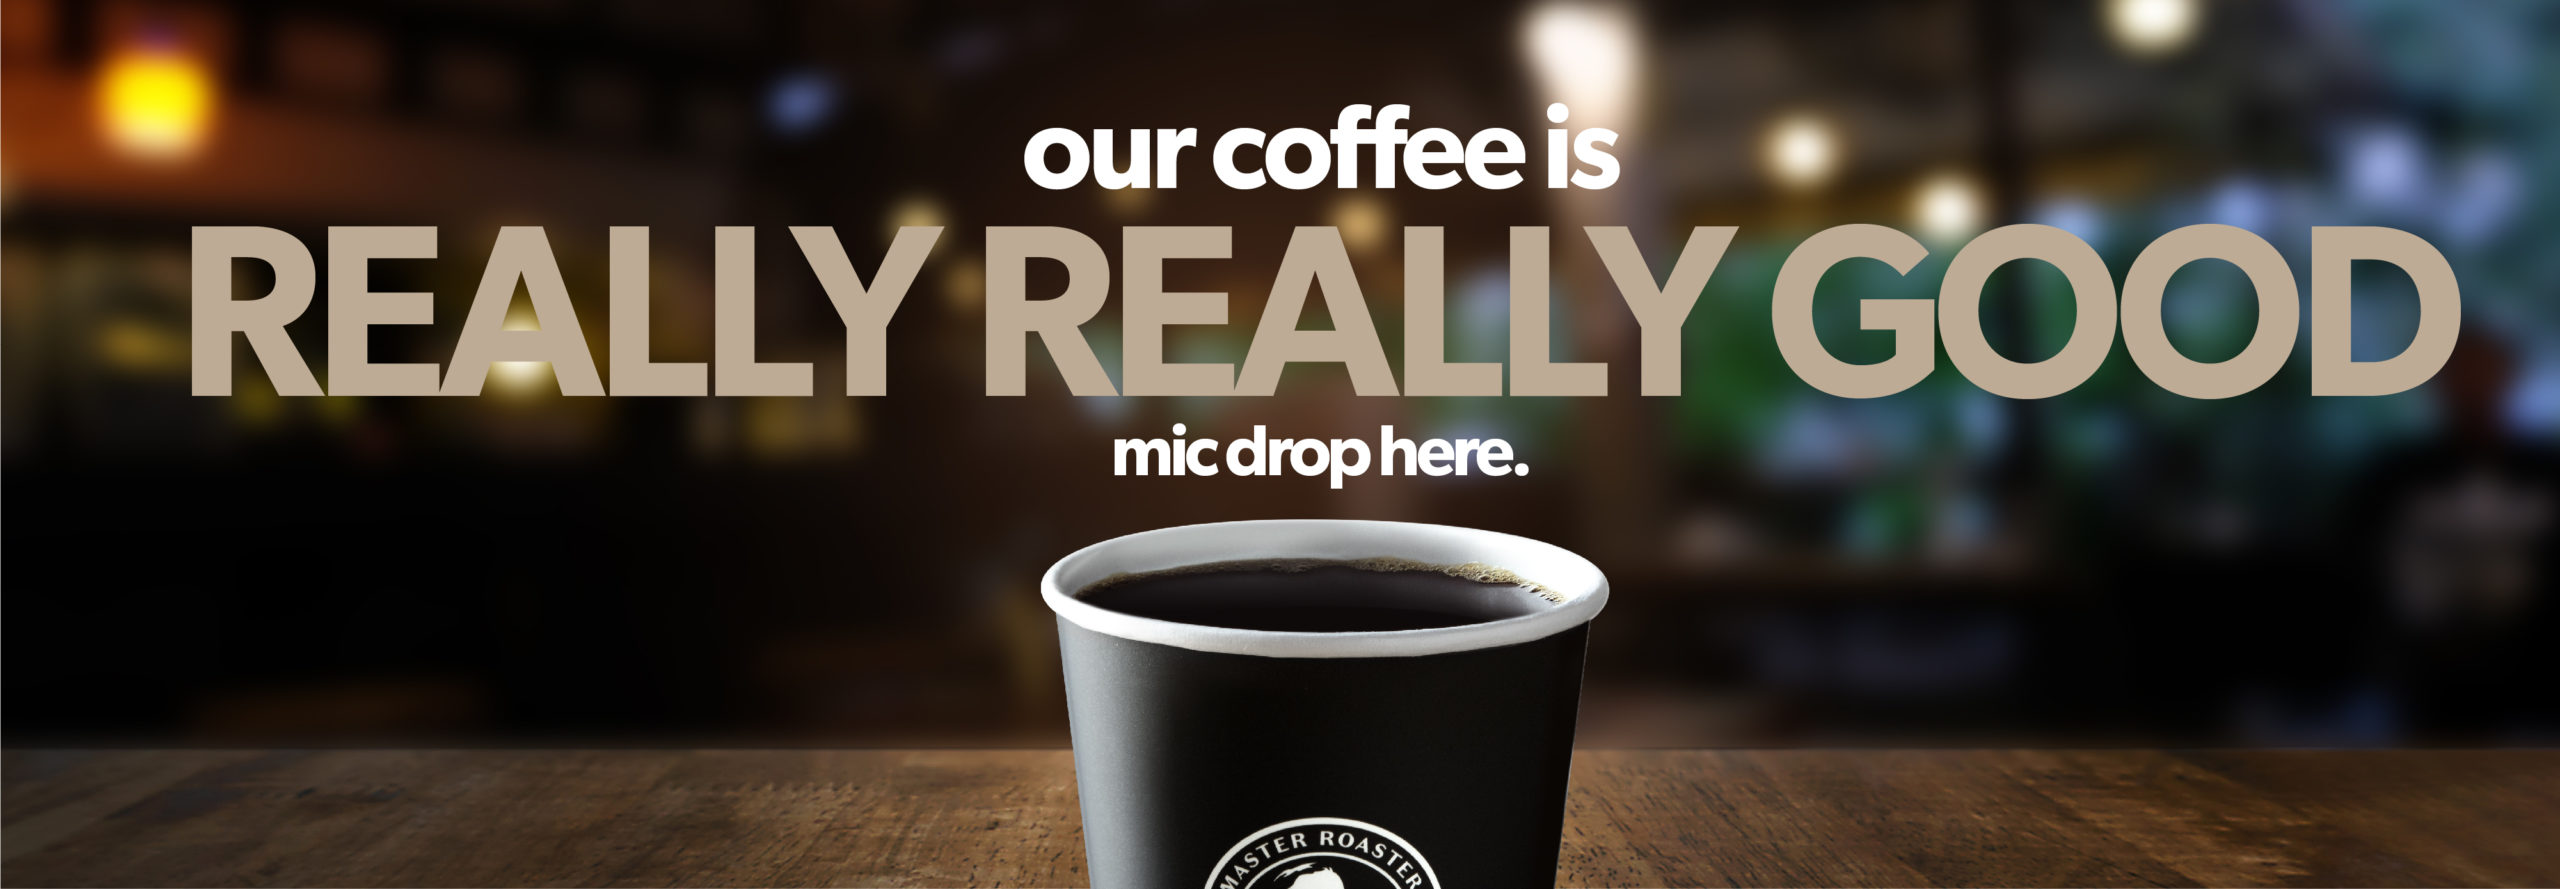 Text Reading 'Our coffee is really really good. Mic drop here.'